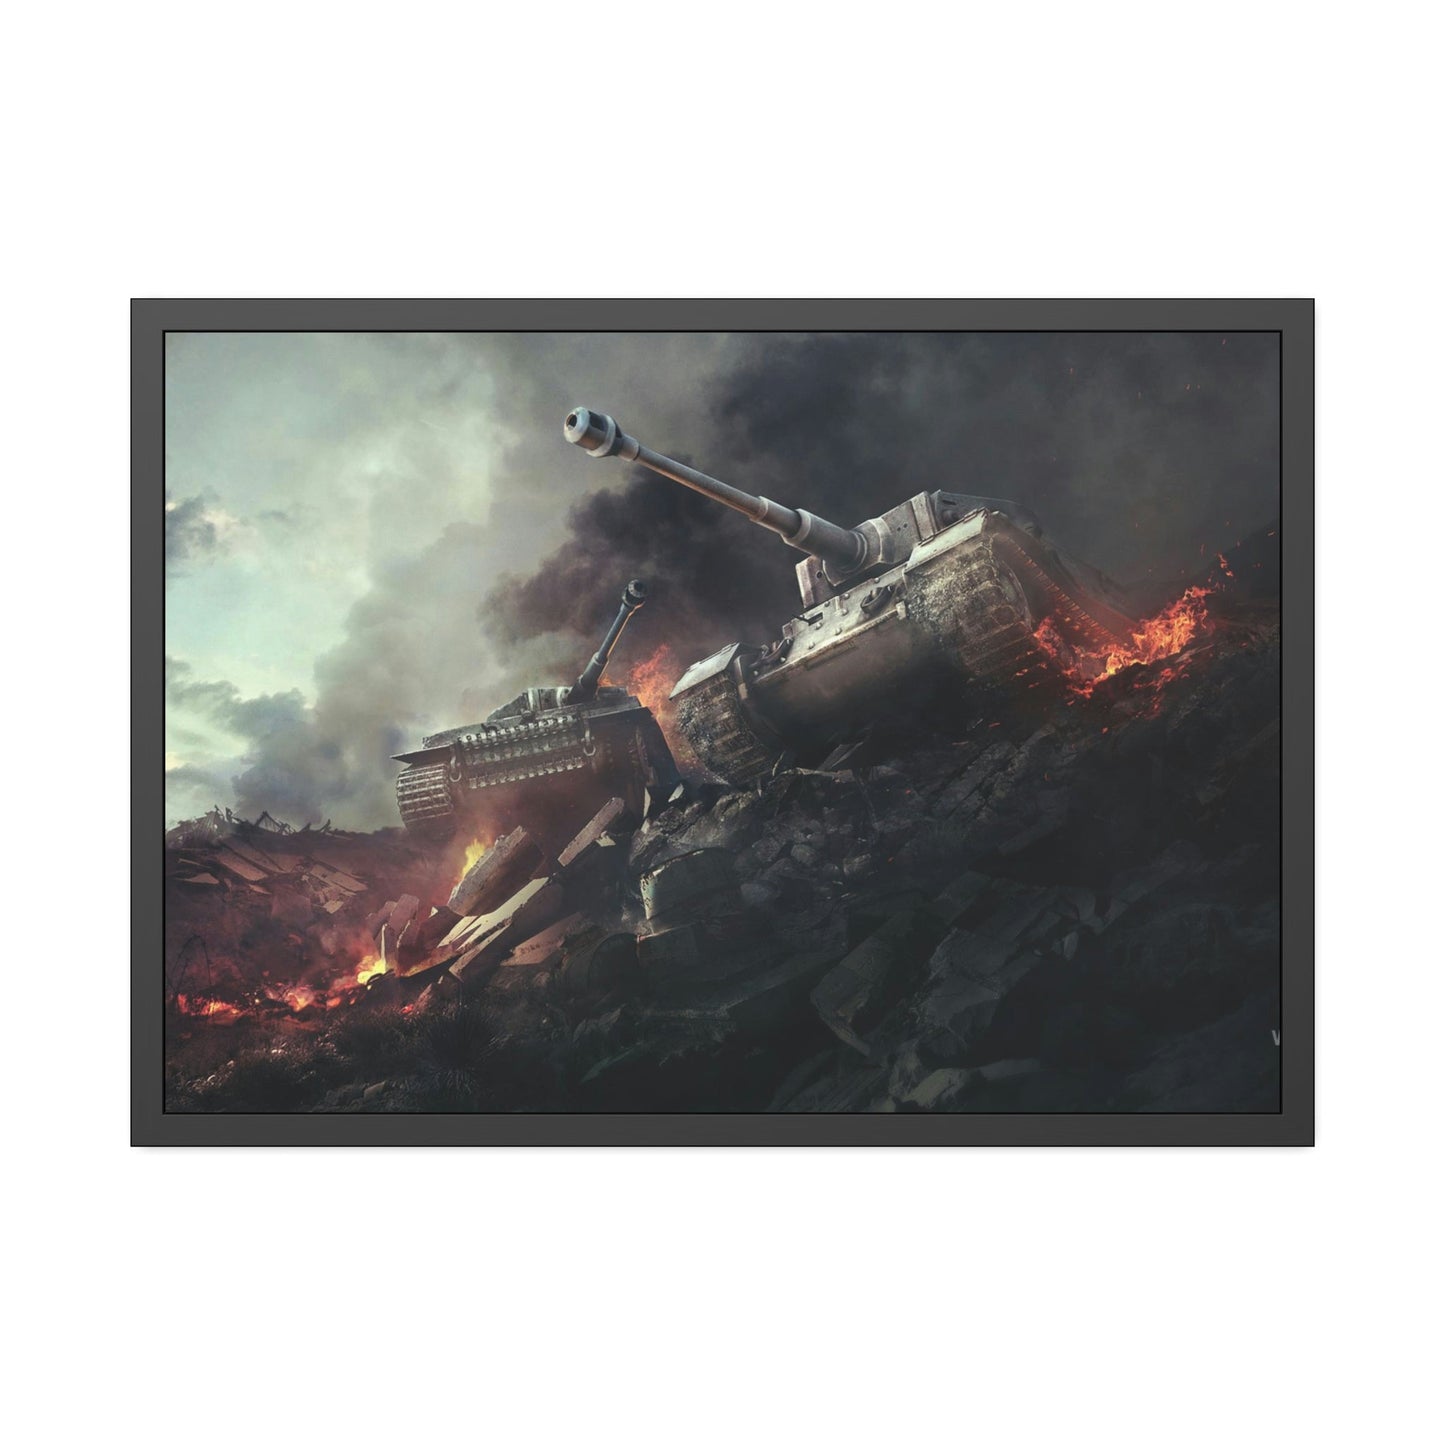 In the Line of Fire: Striking World of Tanks Canvas & Poster Wall Art